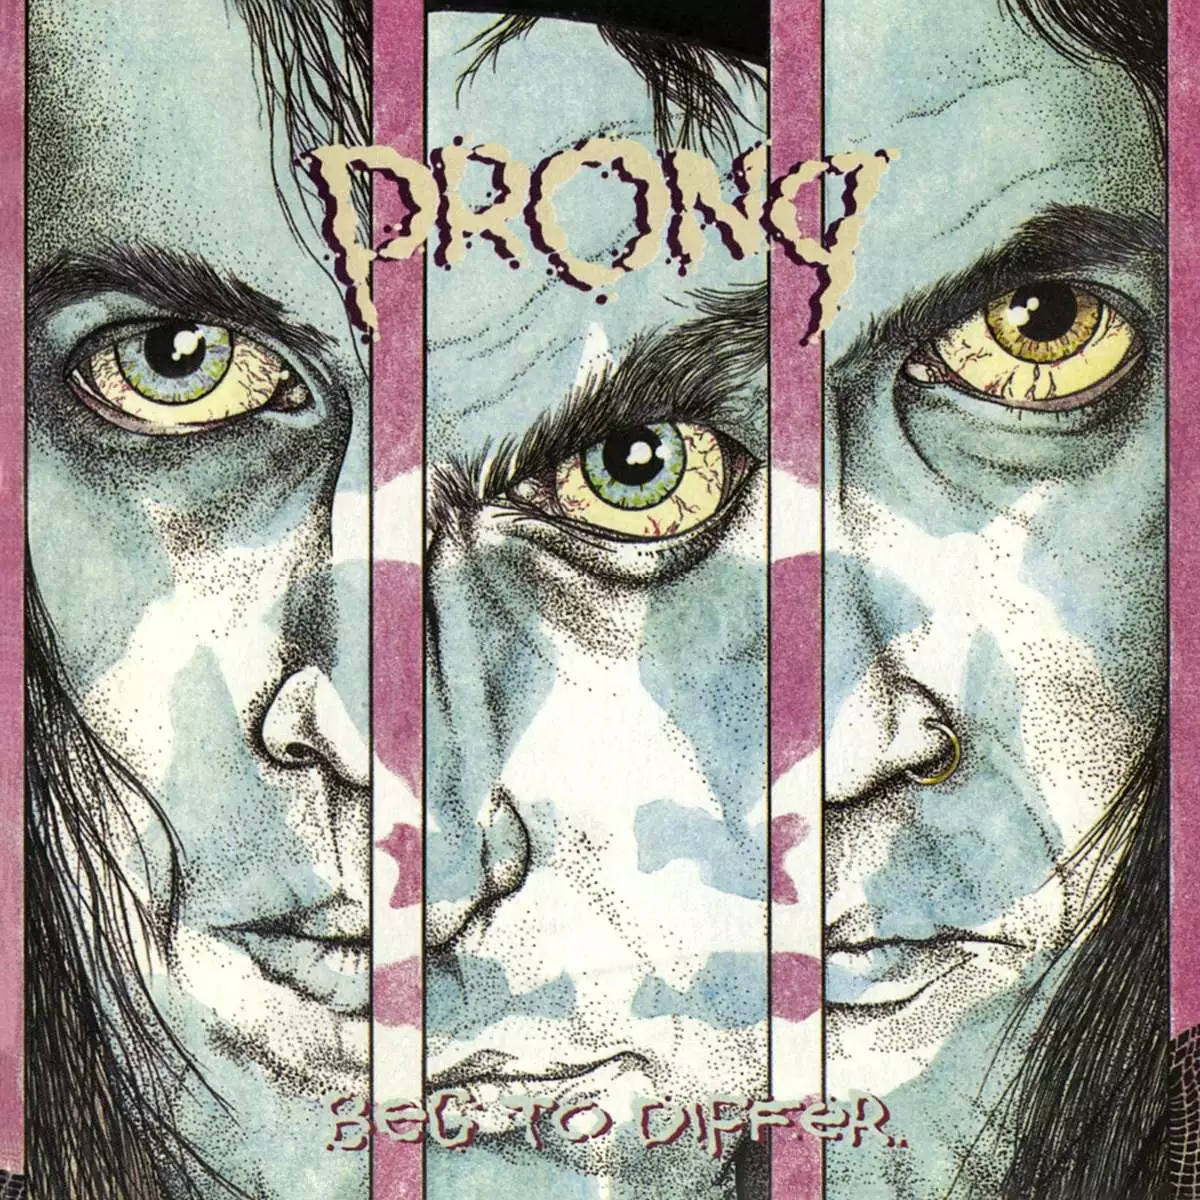 PRONG - Beg To Differ [CD]